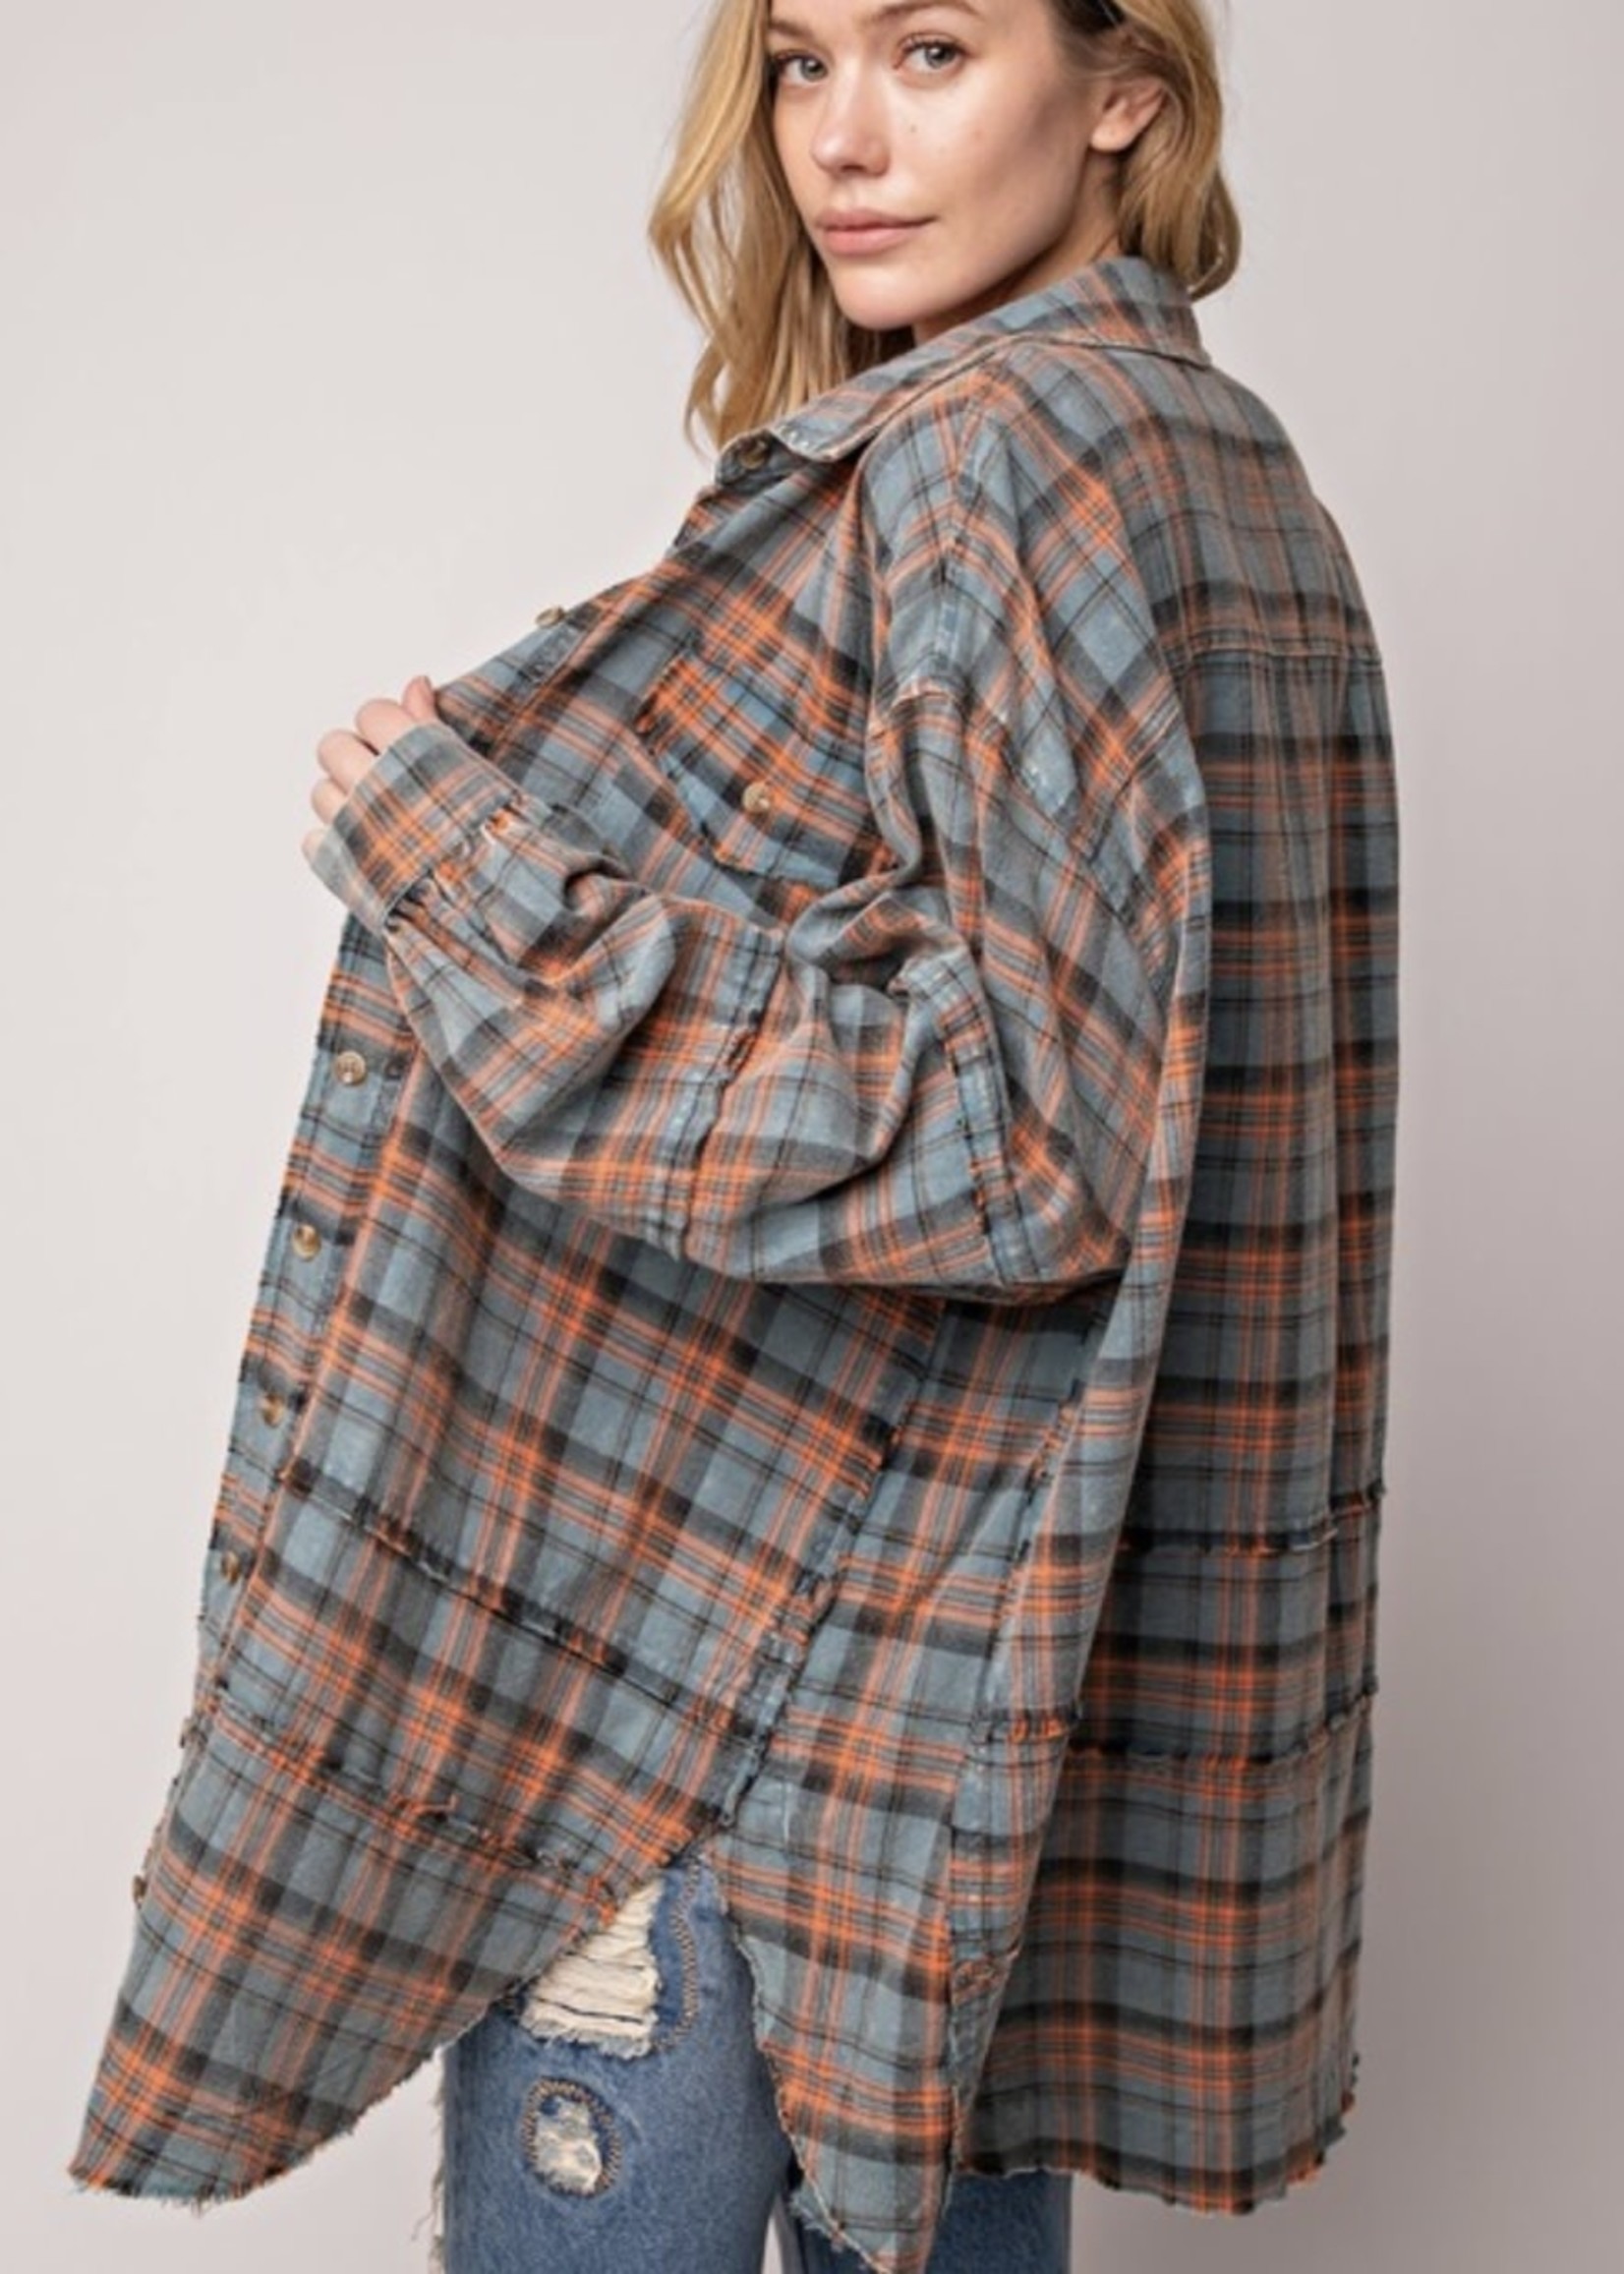 Laine Mineral Washed Plaid Shirt